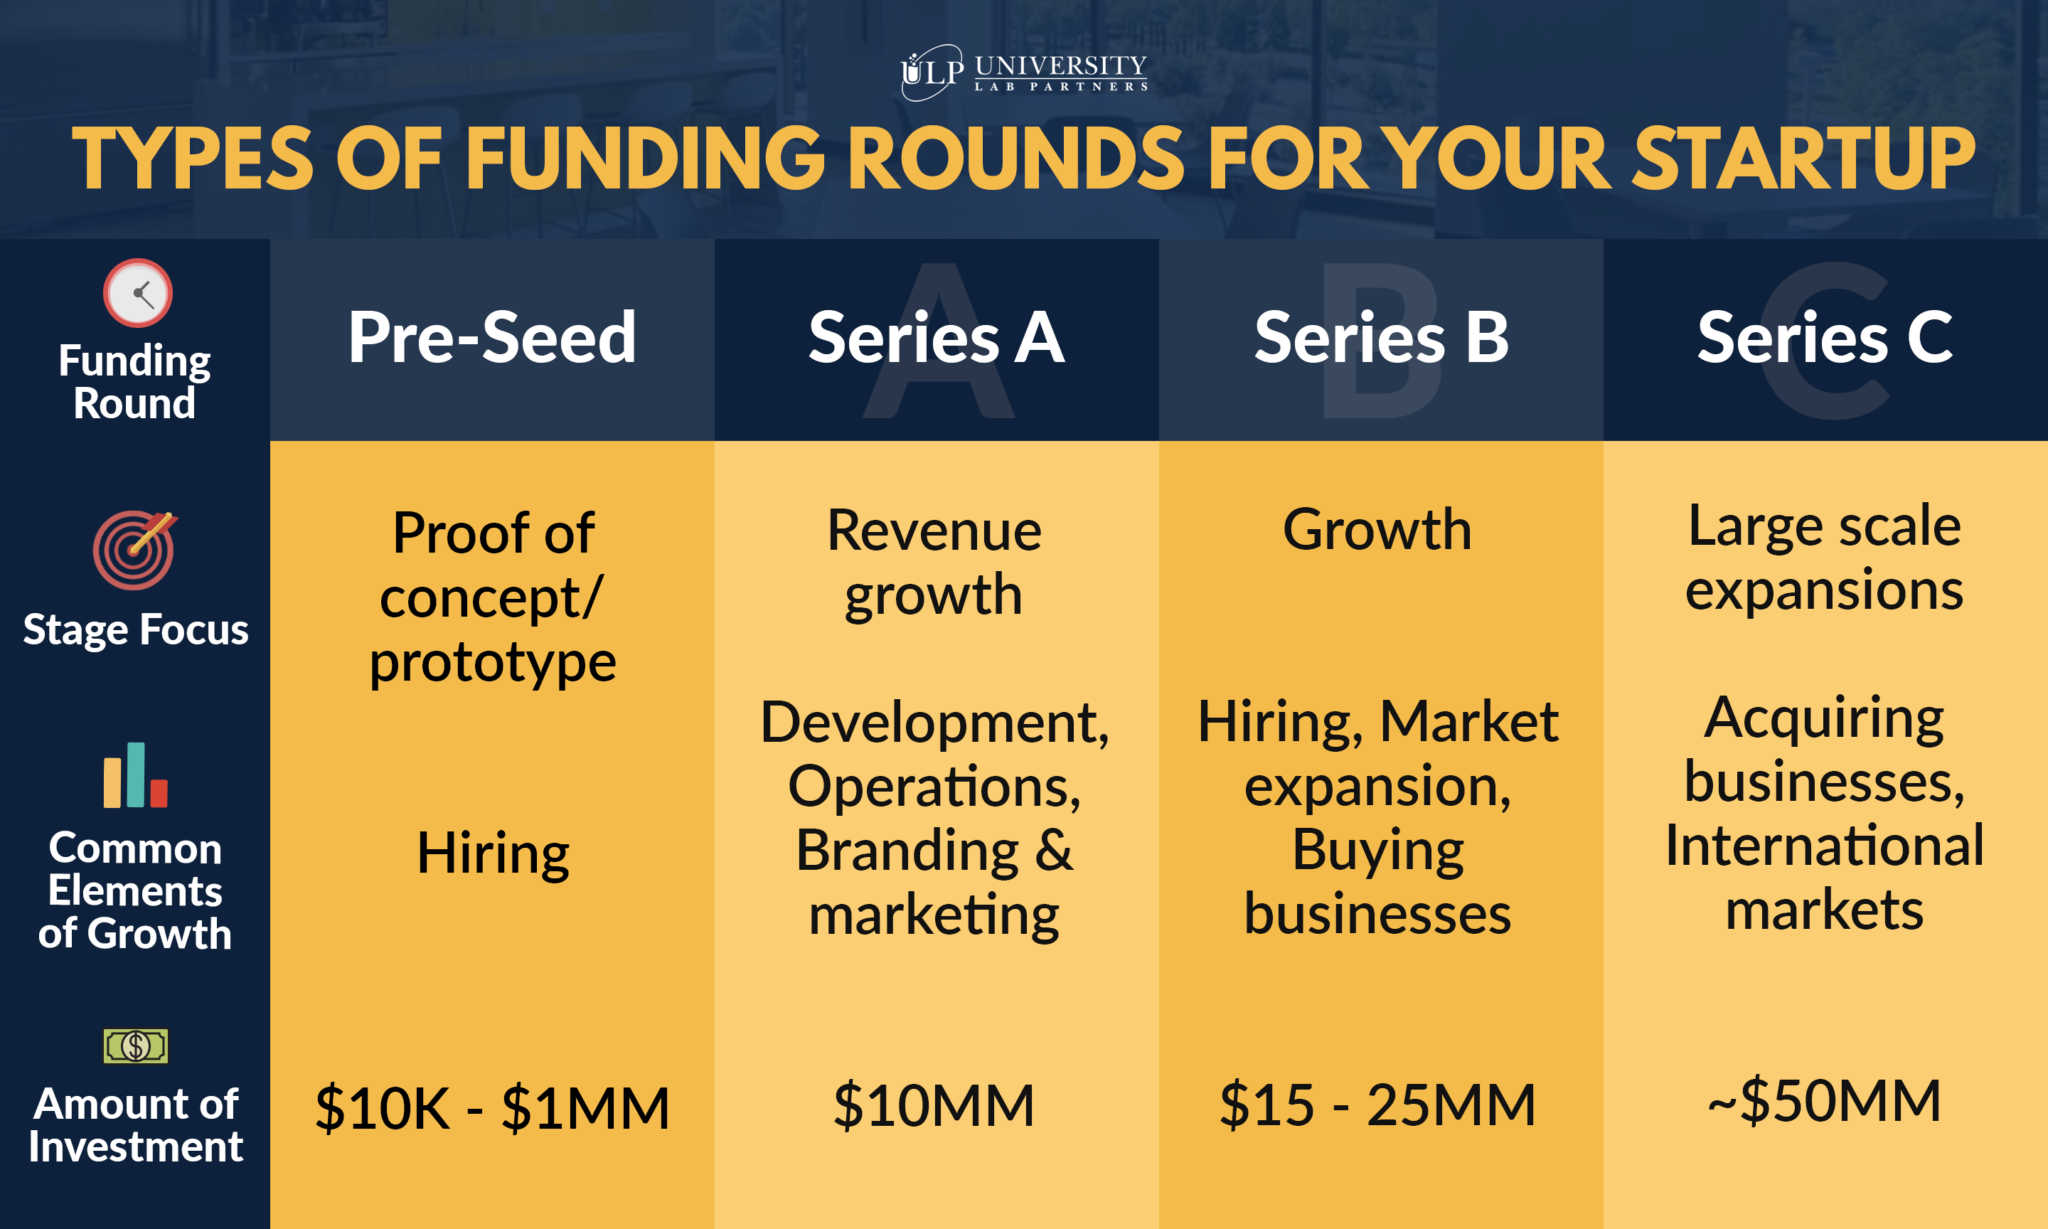 What is Series A, B, and C Funding?